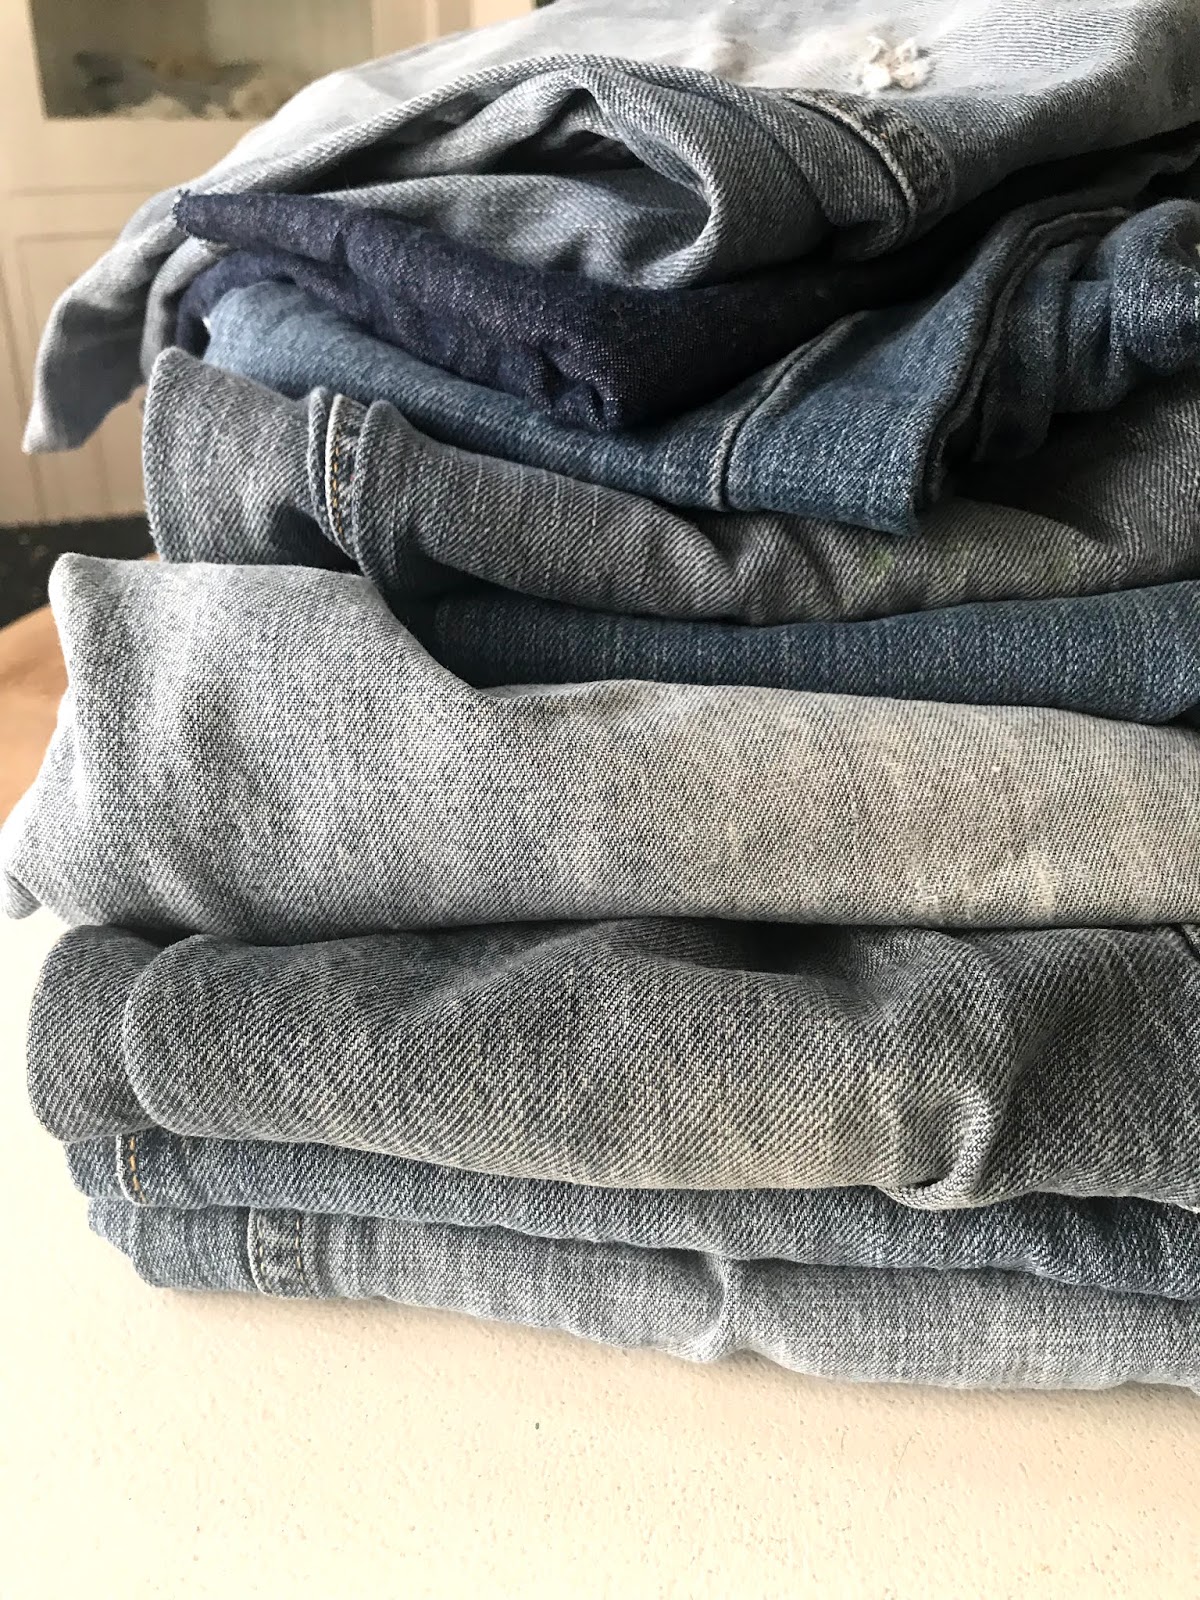 How to recycle your old denim jeans into stylish throw pillows - The ...